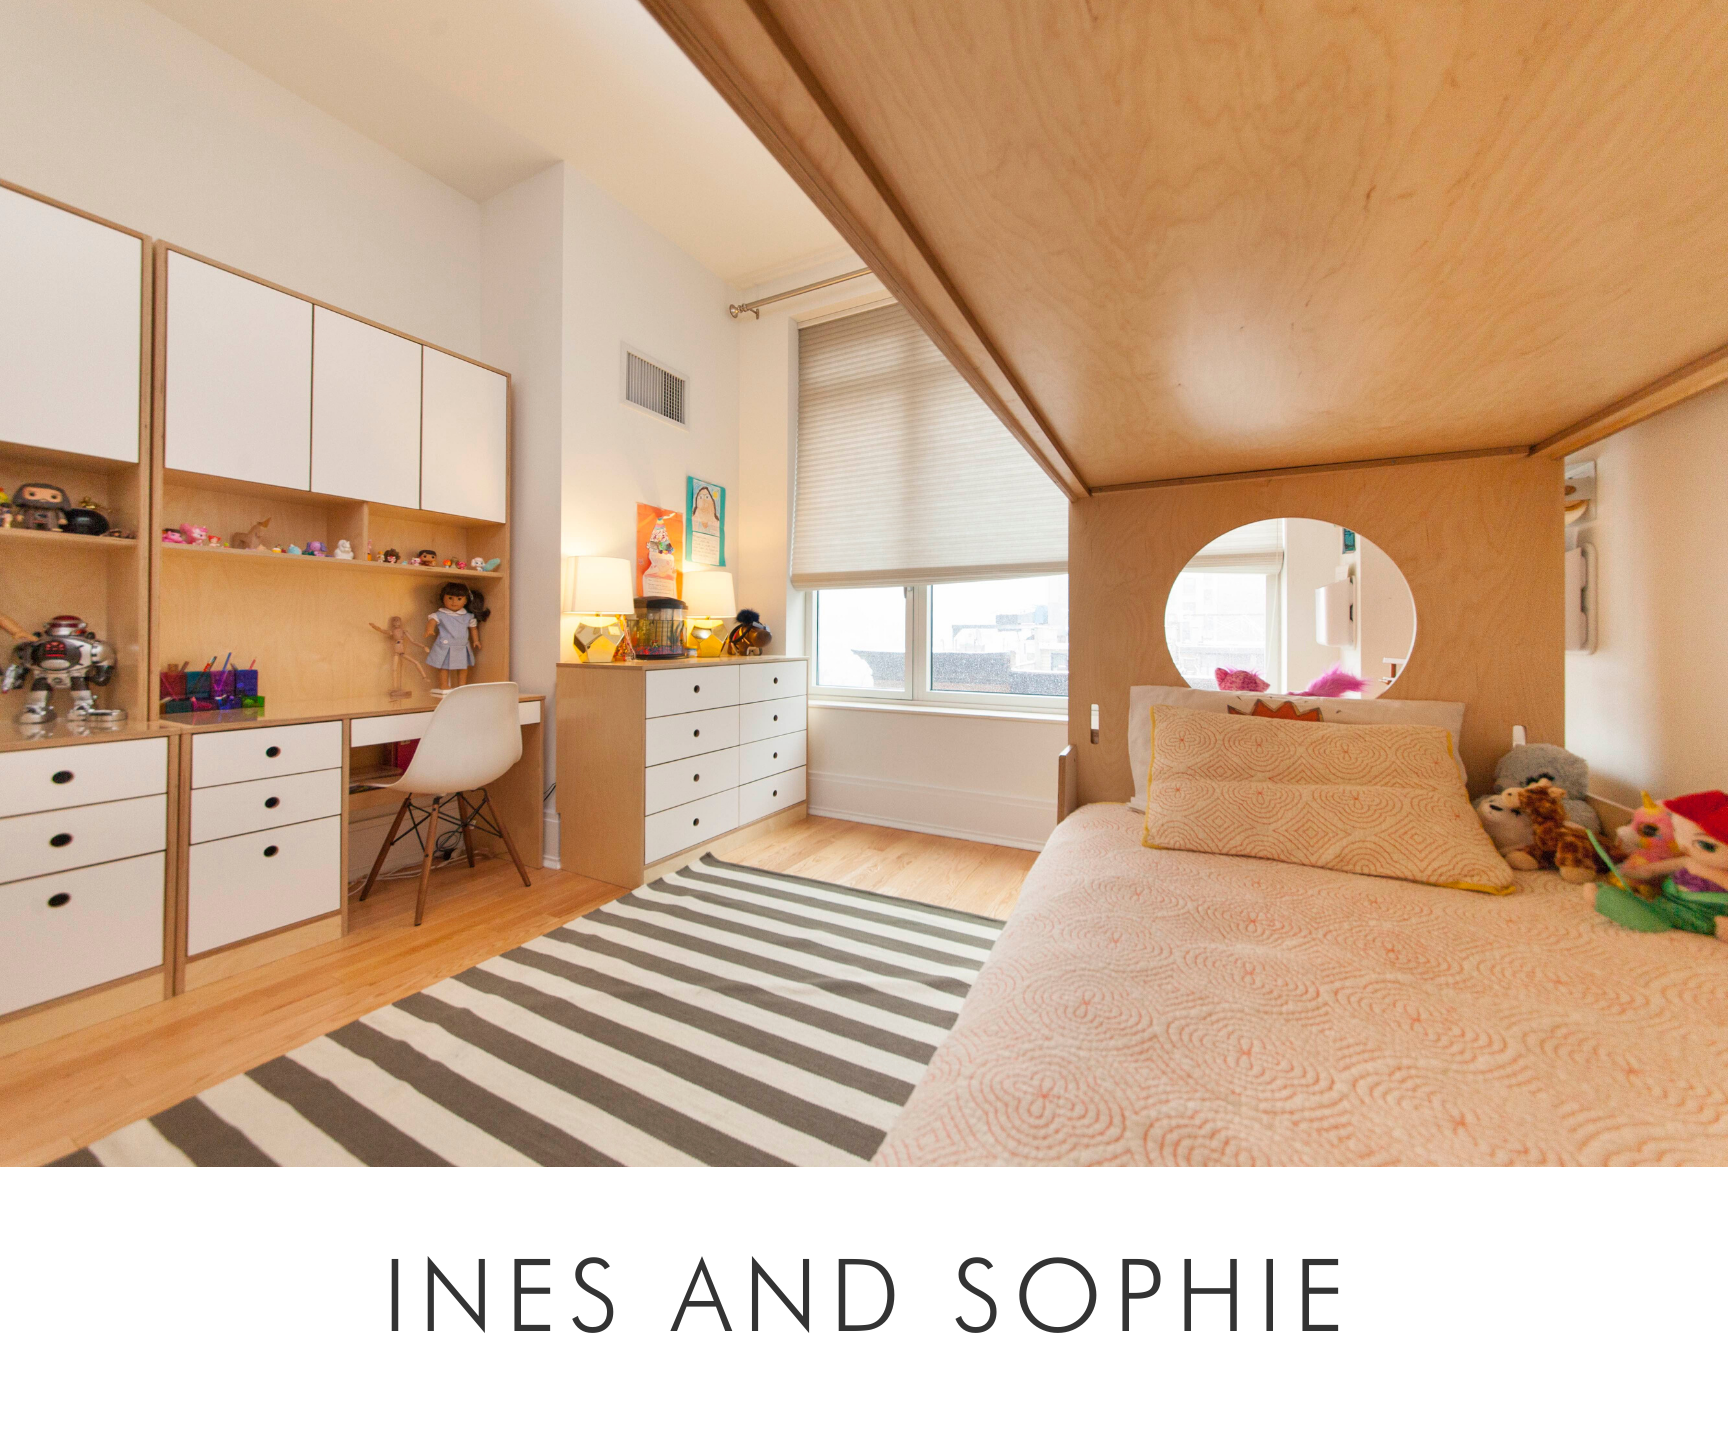 Ines and sophie room bright bedroom with large bed, wooden arch, striped rug, and white cabinetry with toys.